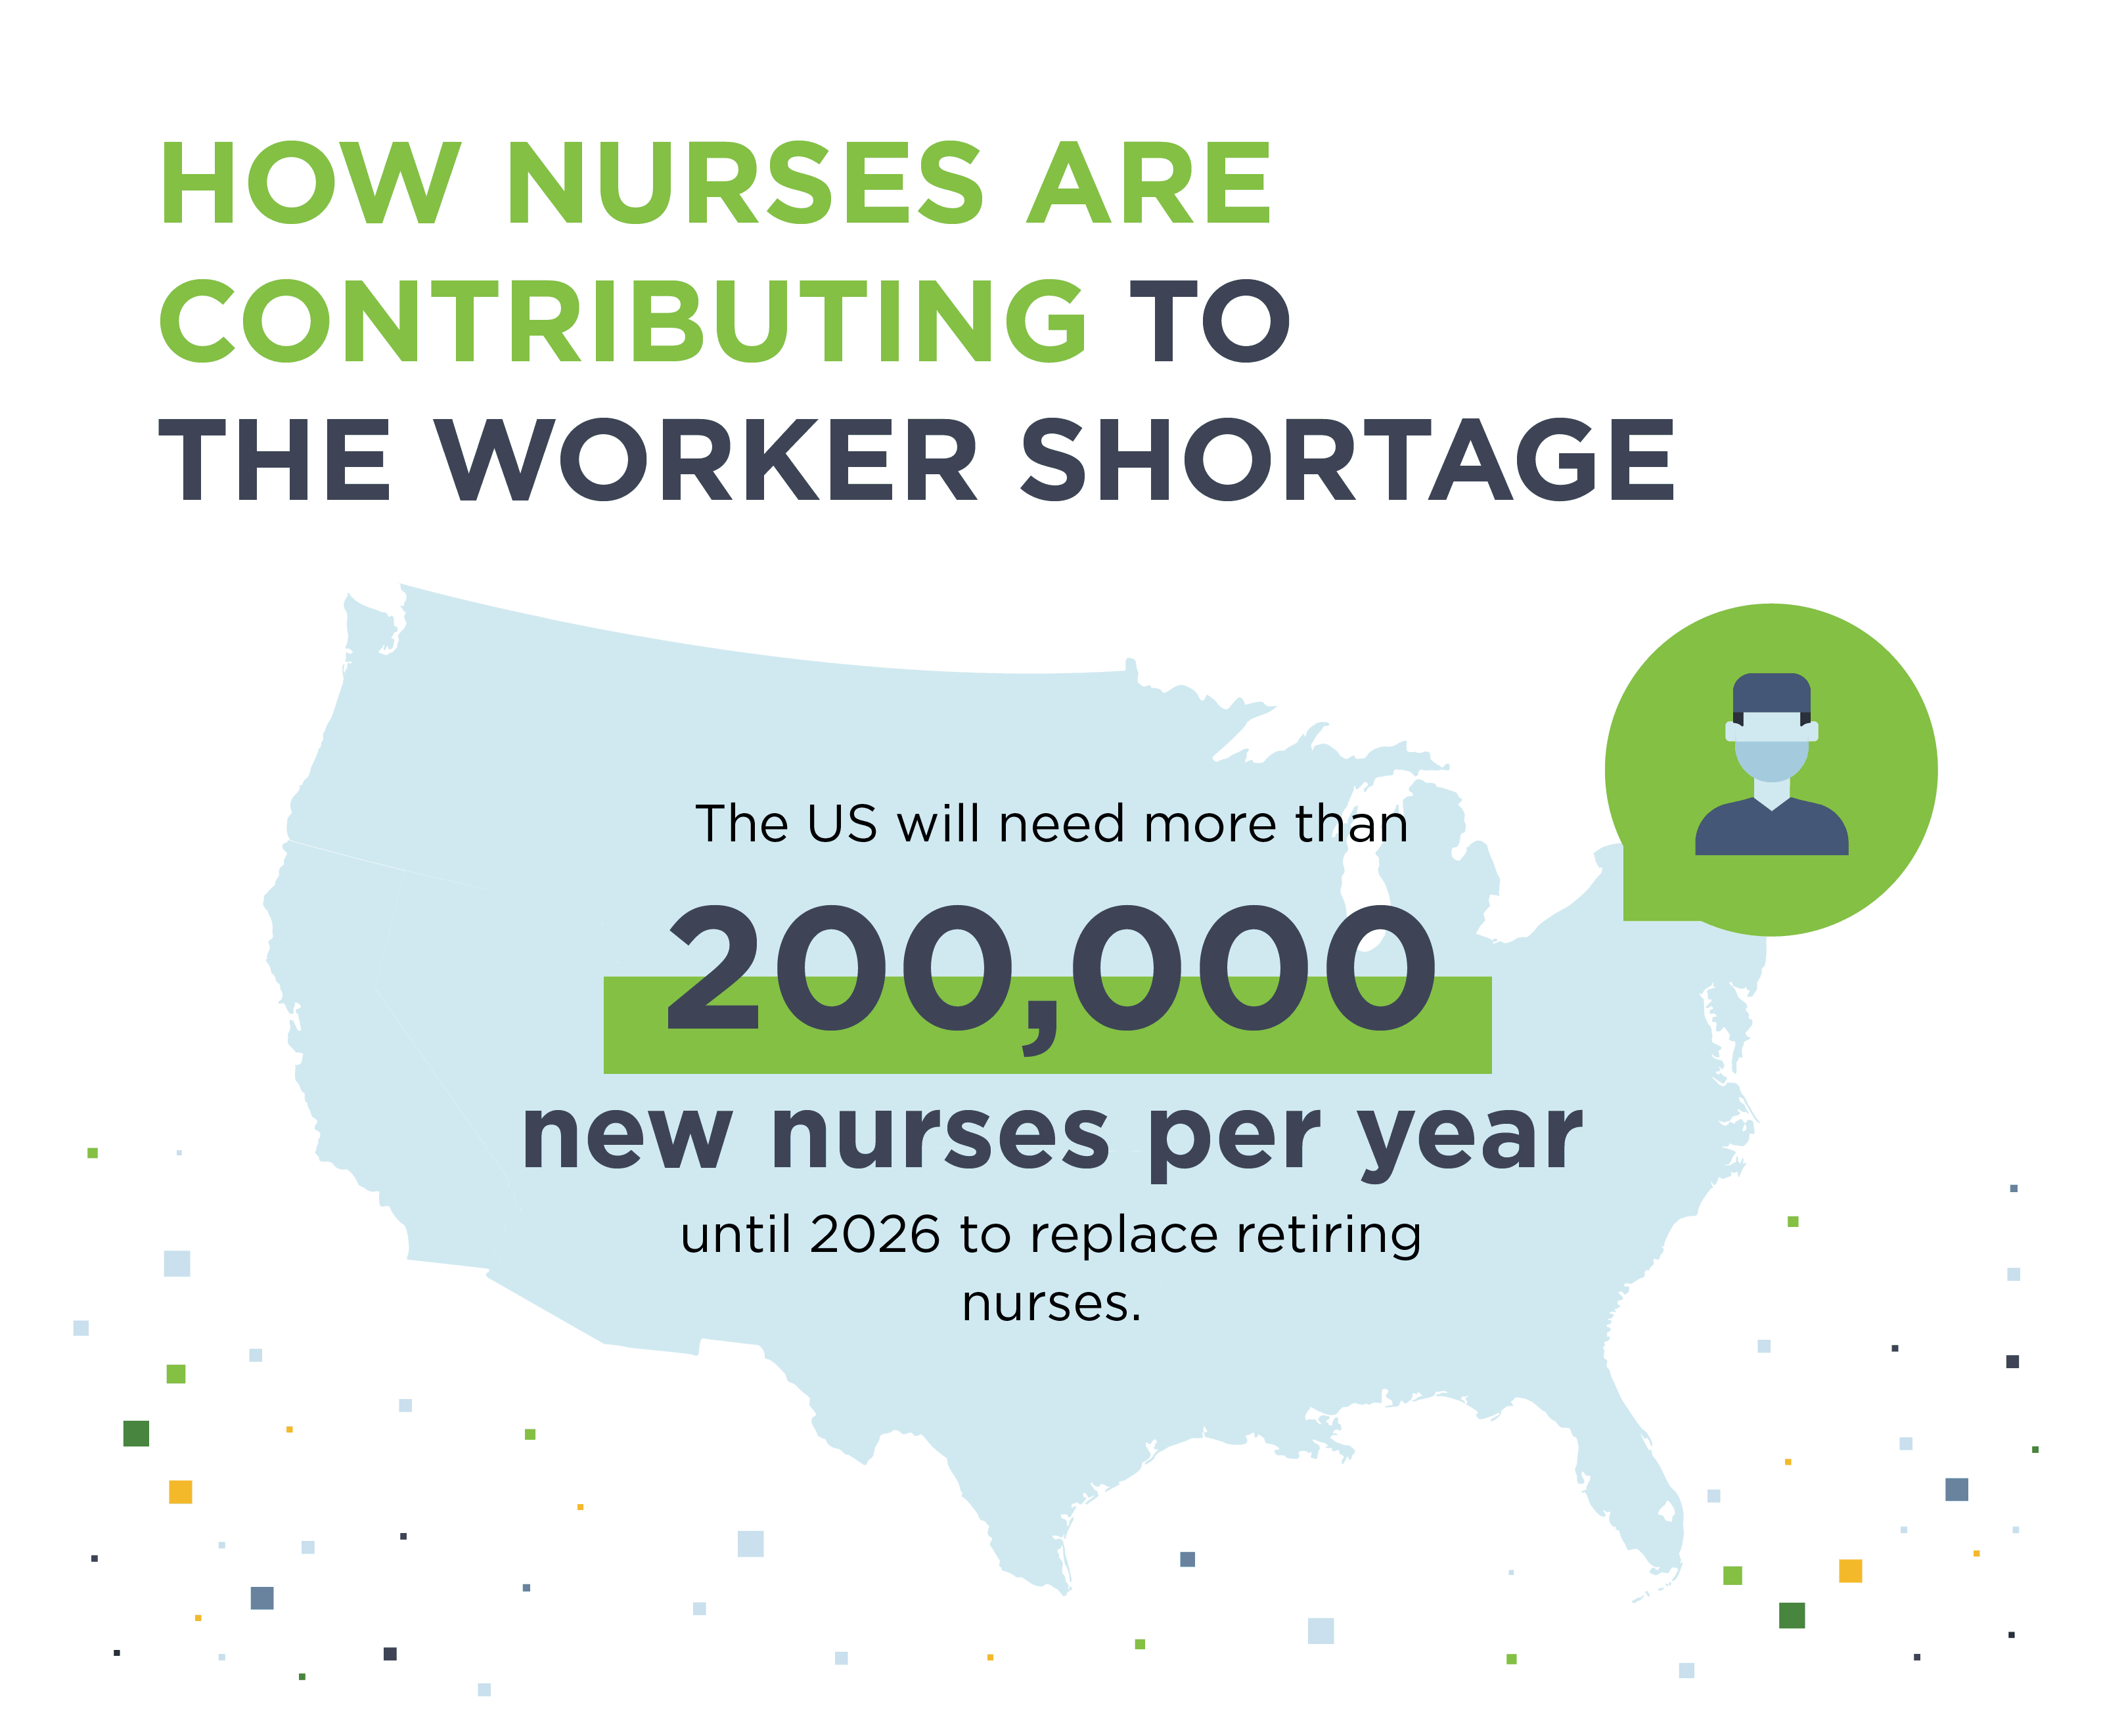 Data shows the US will need 200,000 new nurses per year